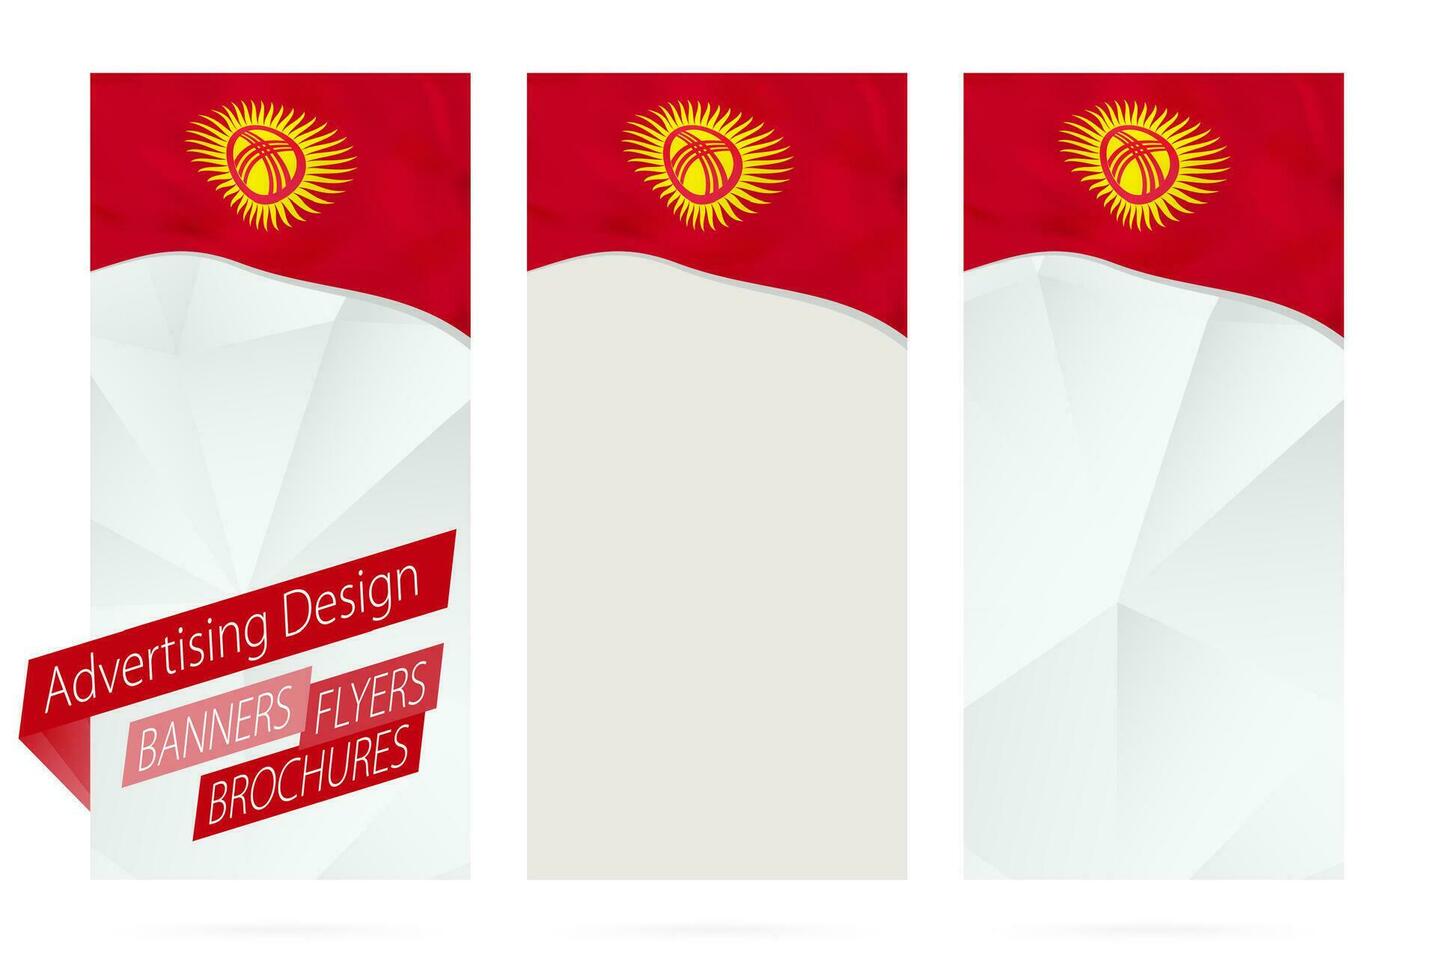 Design of banners, flyers, brochures with flag of Kyrgyzstan. vector